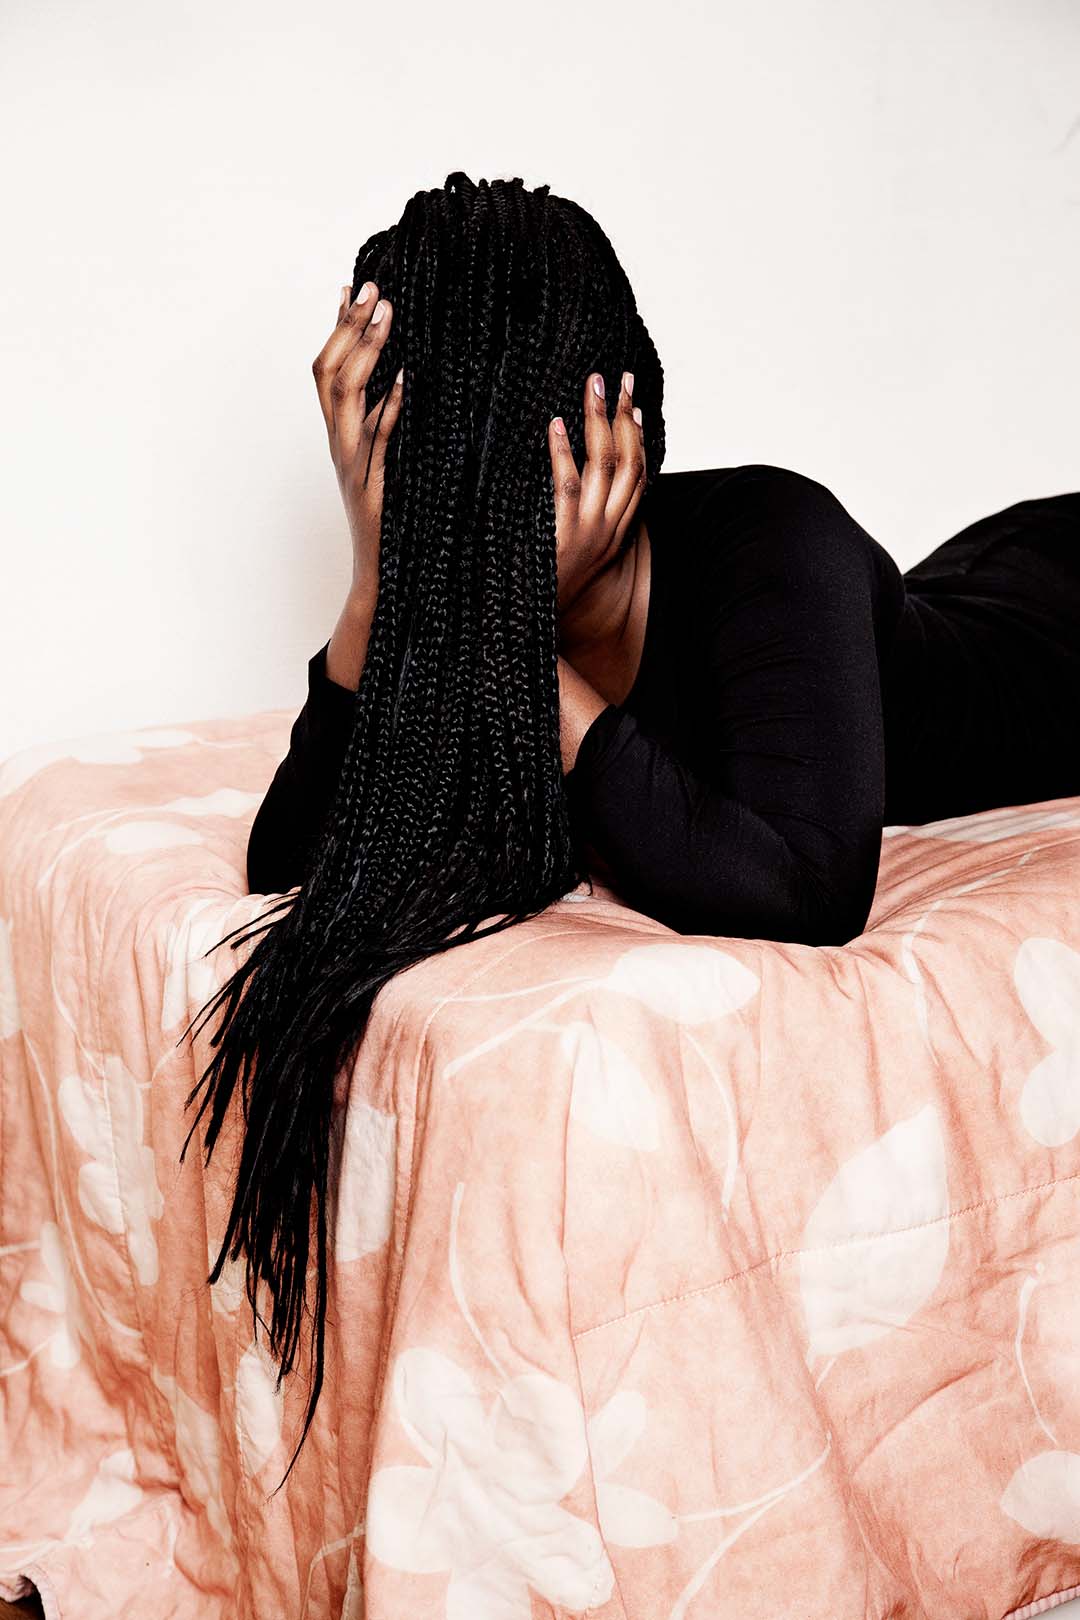 Photo of a woman laying on her front on a bed with her braided hair covering her face